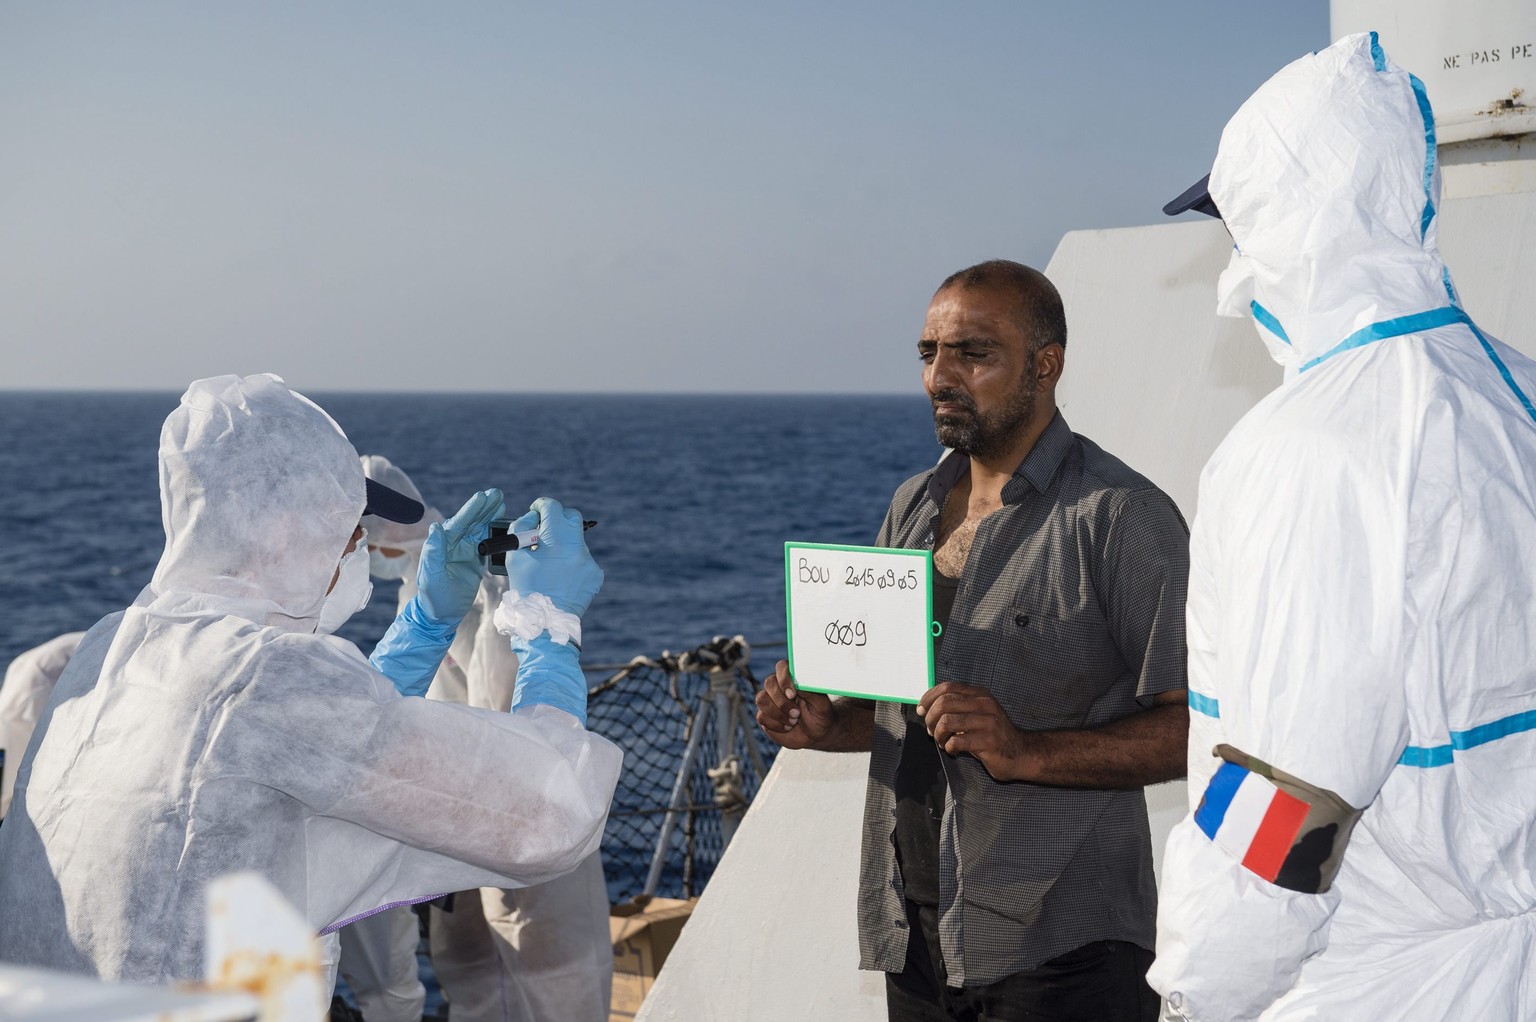 epa04918465 A handout picture provided by the Marine Nationale Francaise (French Navy) on 07 September 2015 shows the French Navy crew of the &#039;Commandant Bouan&#039; patrol vessel registering a r ...